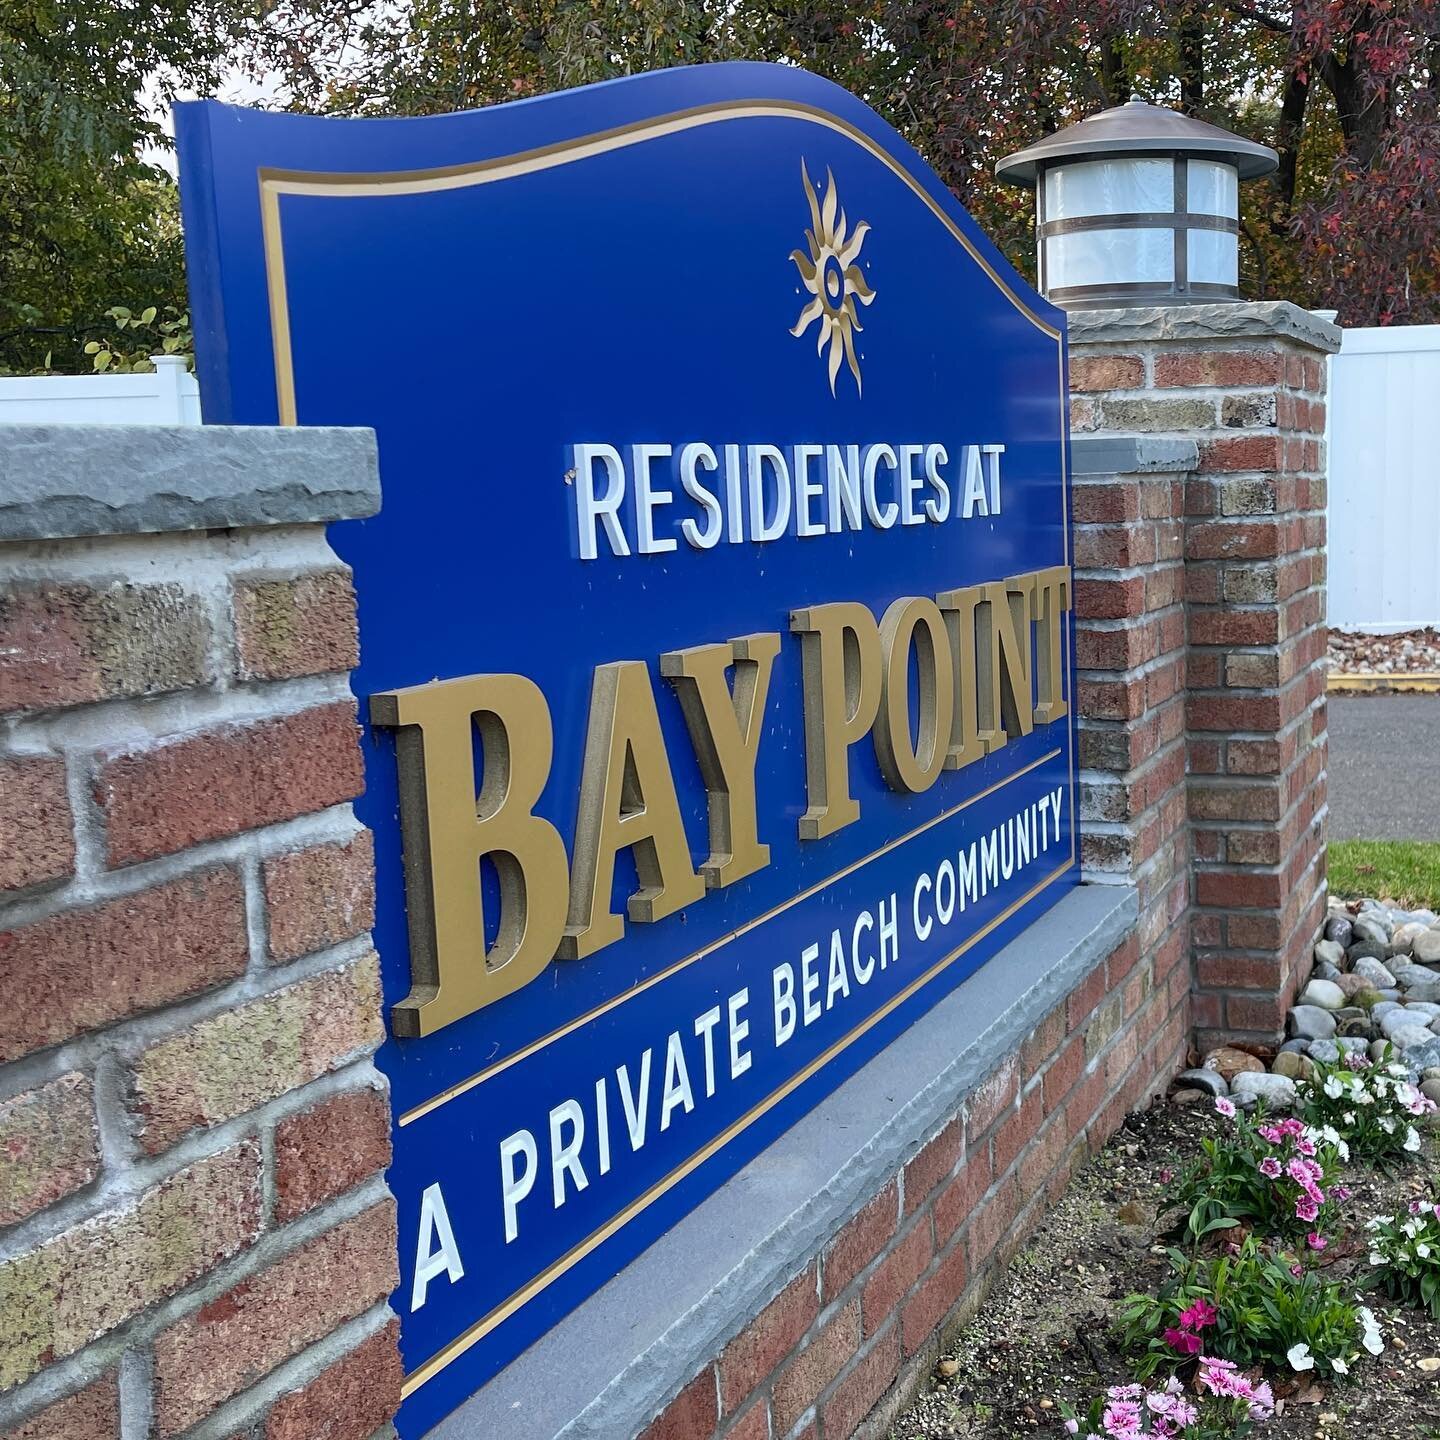 Amazing V routed Pvc with custom paint and dimensional lettering we fabricated and installed at Residences at Bay Point in Point Pleasant Beach! Get your free quote today!